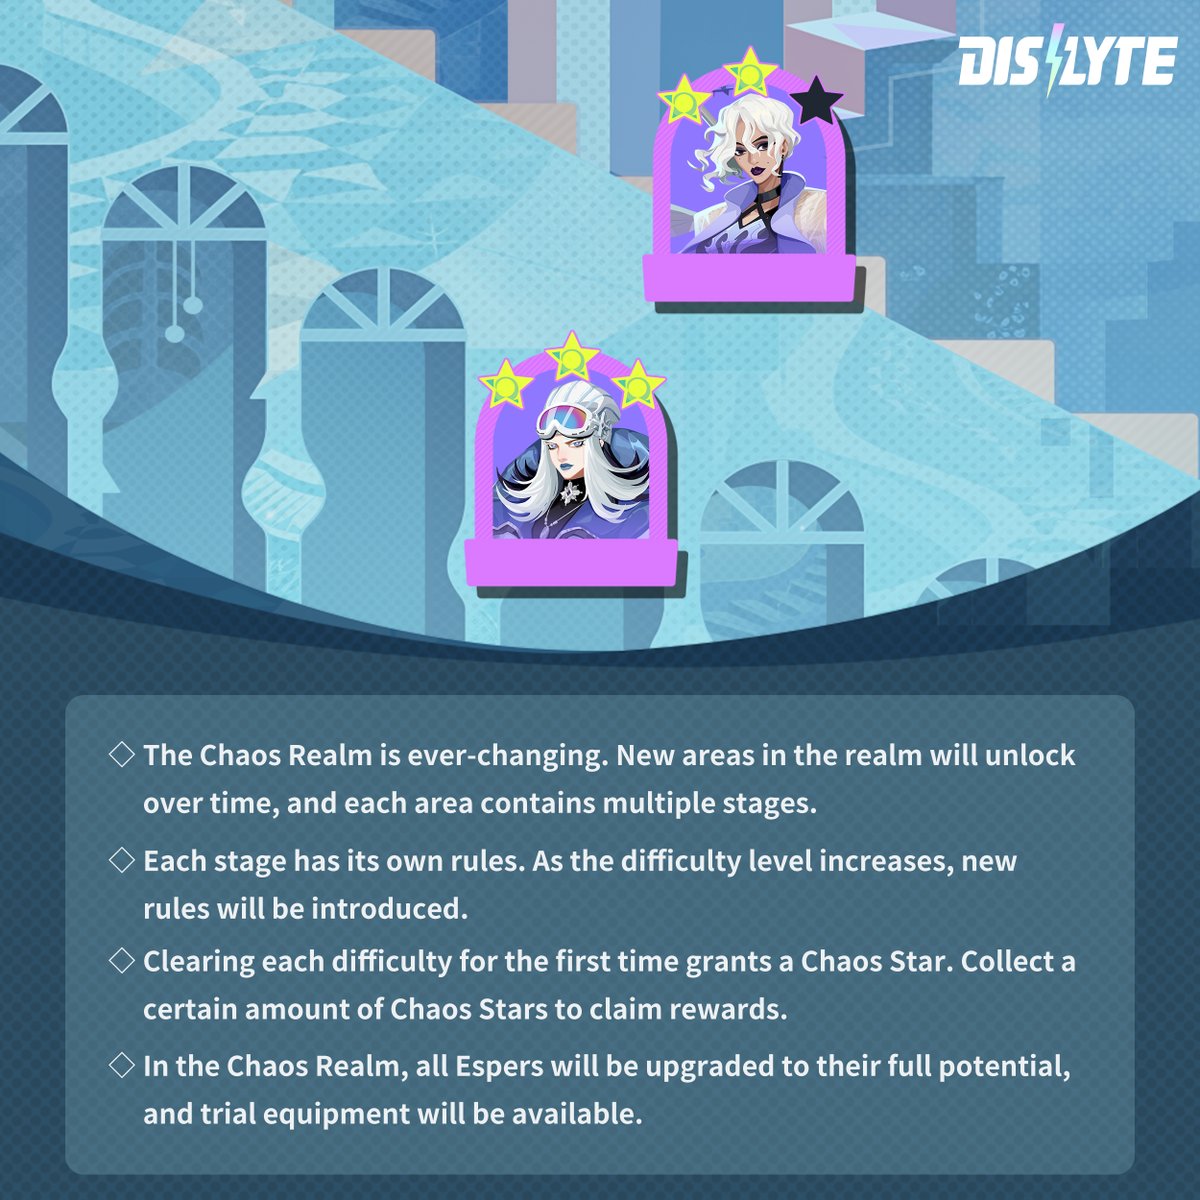 Chaos Realm

After the update, Chaos Miracle will be added to Miracle Adventure for players to explore. The Chaos Realm is ever-changing. Let's learn what can be done in the Chaos Miracle with Boomboom!

#Dislyte #シンネオ #디스라이트 #众神派对